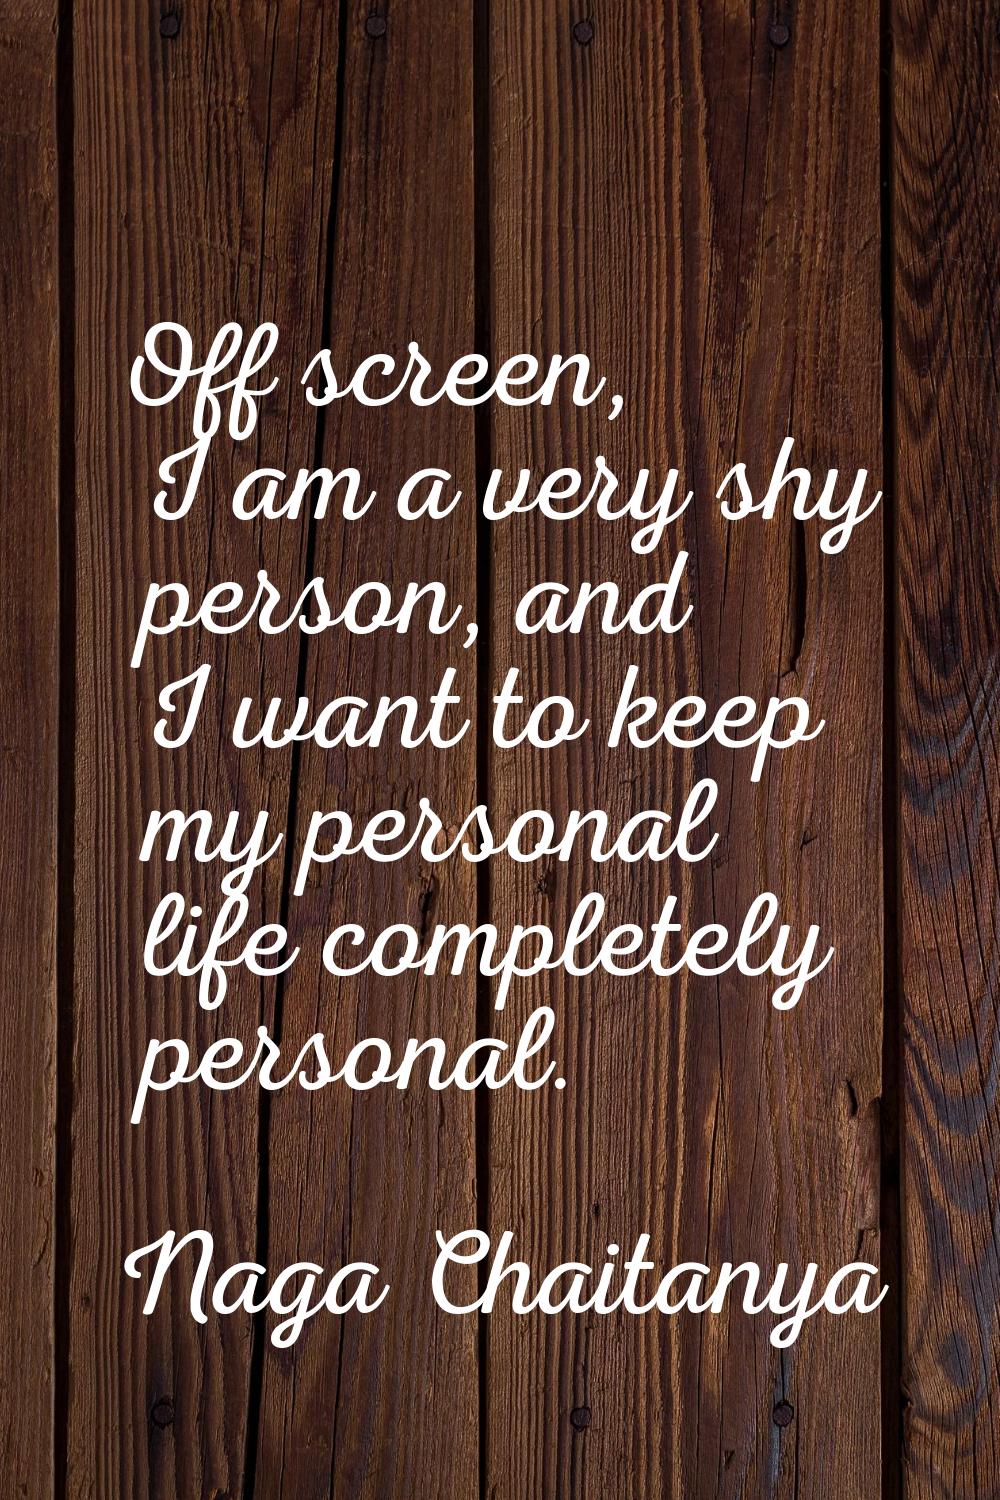 Off screen, I am a very shy person, and I want to keep my personal life completely personal.